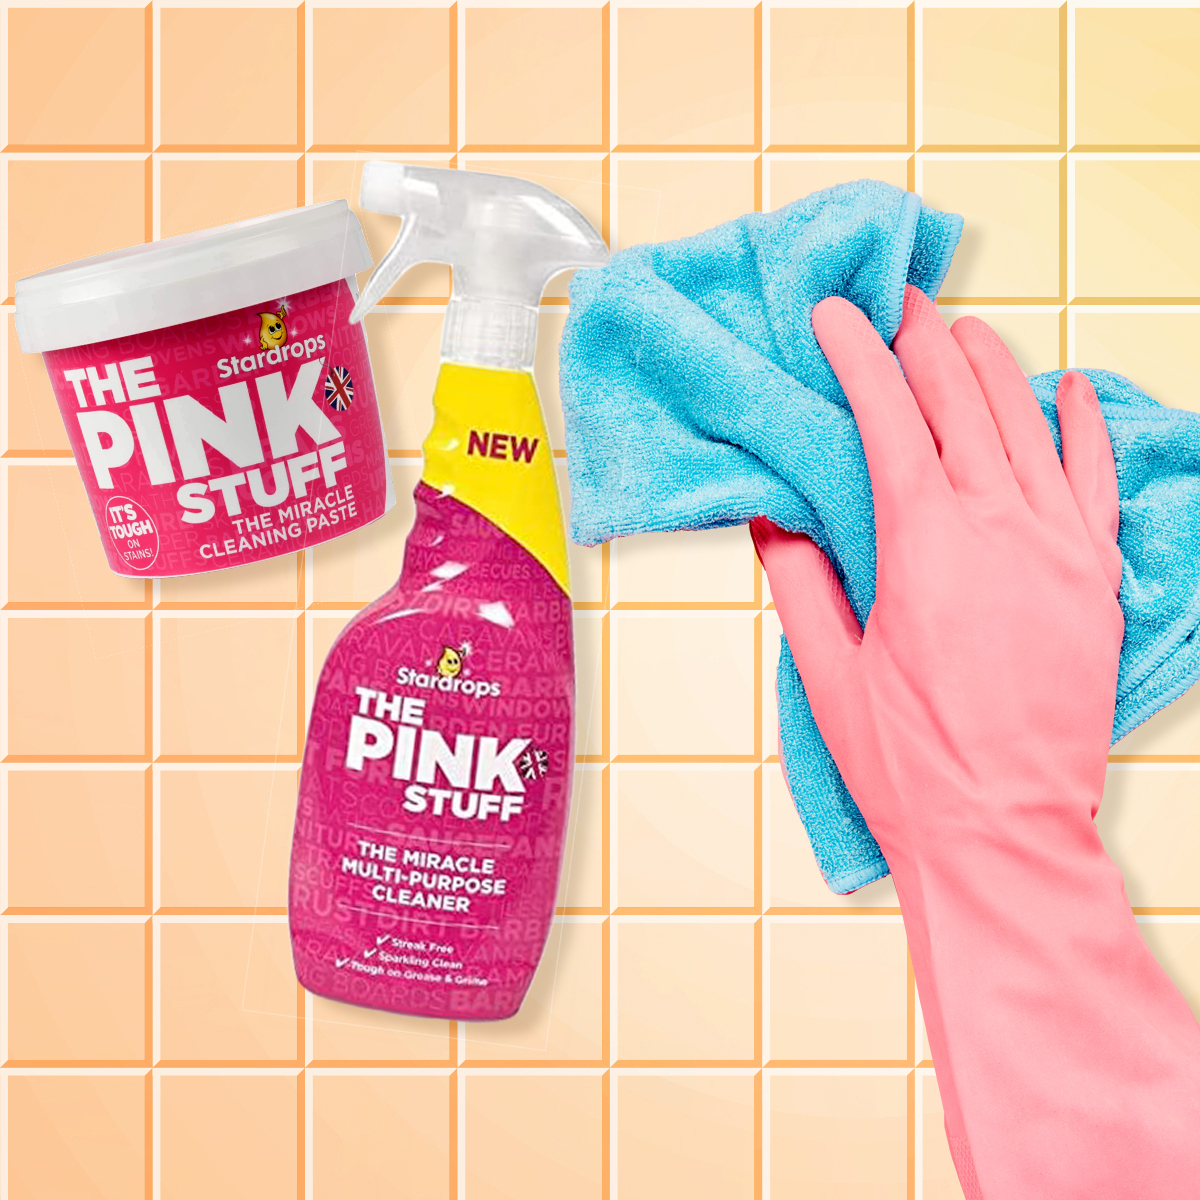 The Pink Stuff - Miracle Cleaning Paste, Multi-Purpose Spray